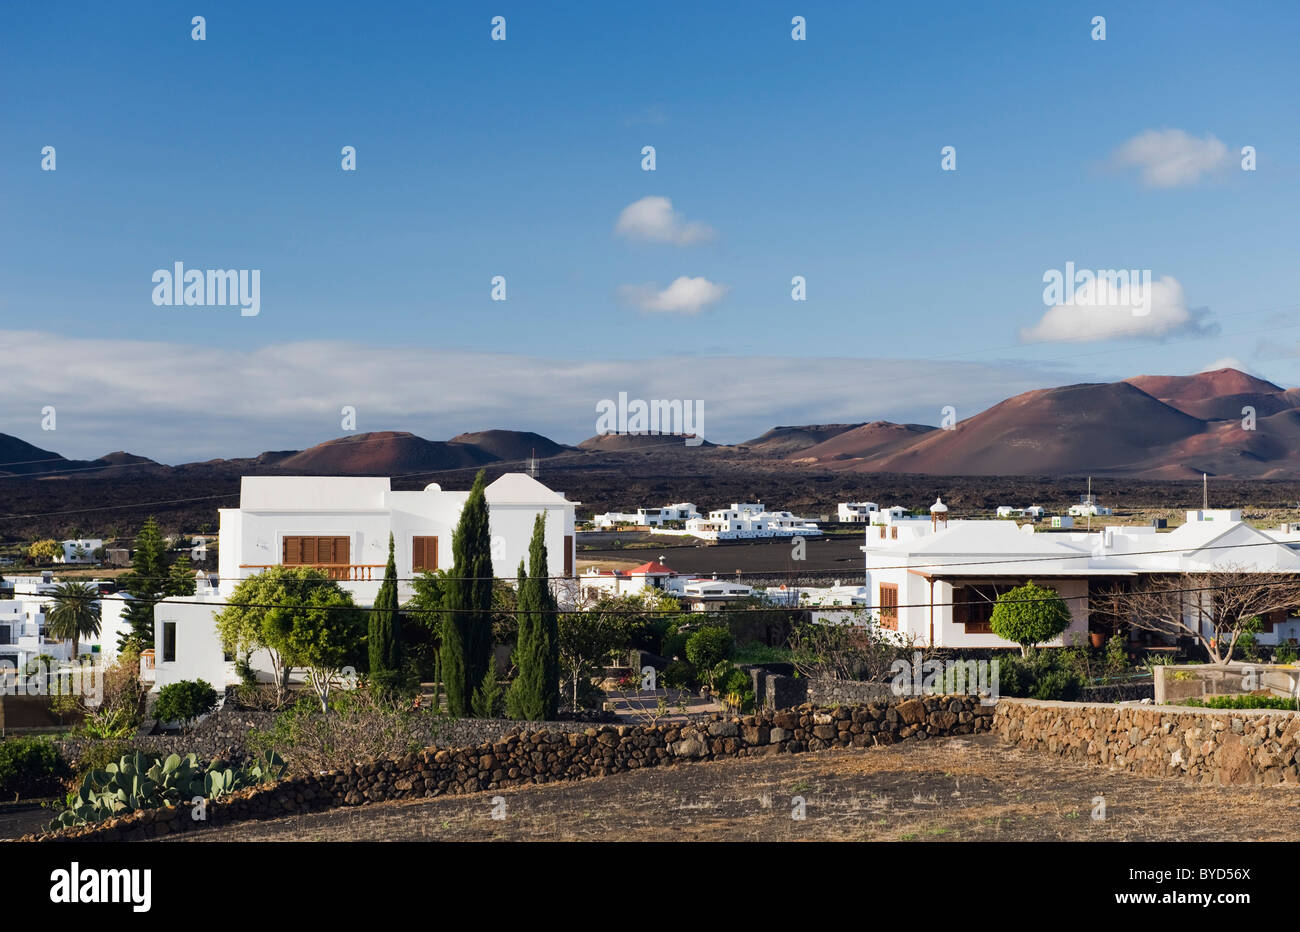 White town in a volcanic landscape, Yaiza, Lanzarote, Canary Islands, Spain, Europe Stock Photo